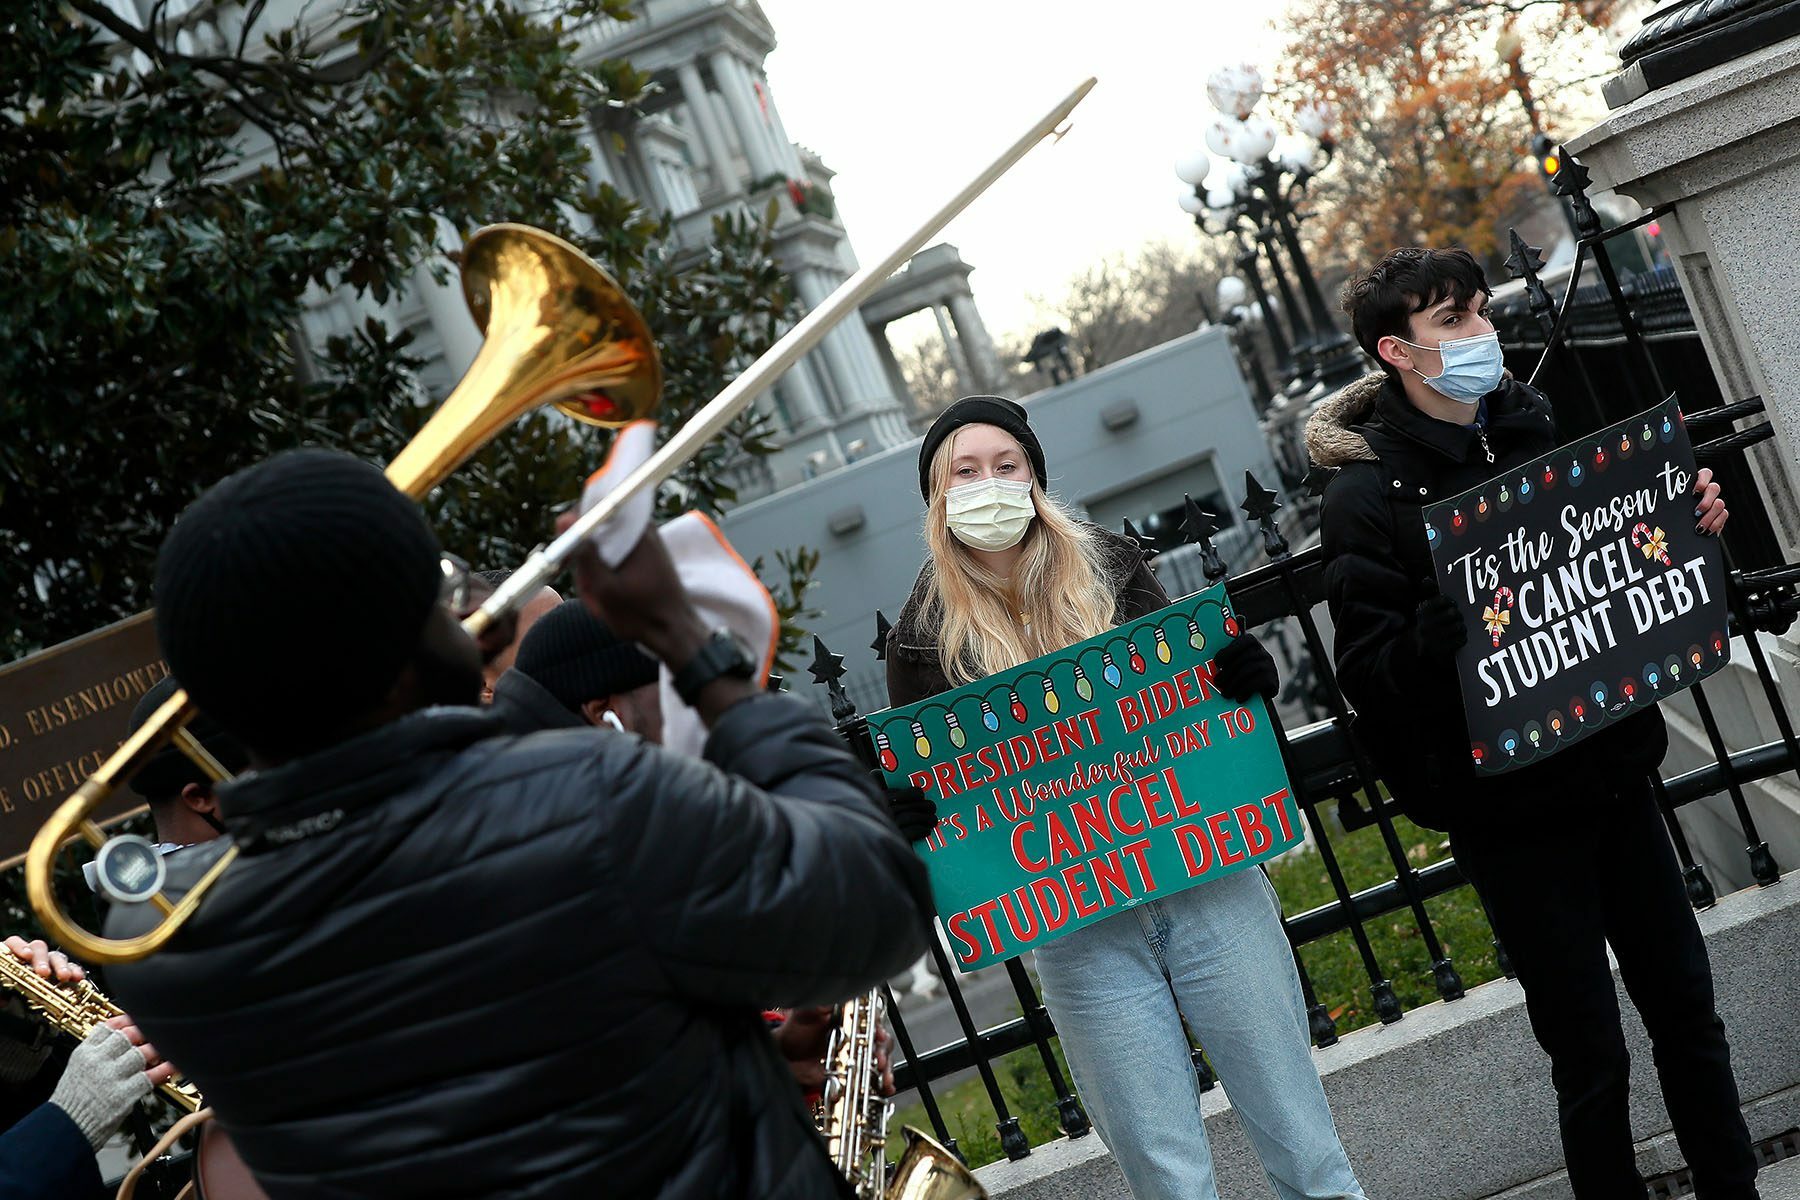 Activists hold signs calling on President Biden to cancel student debt near the White House.